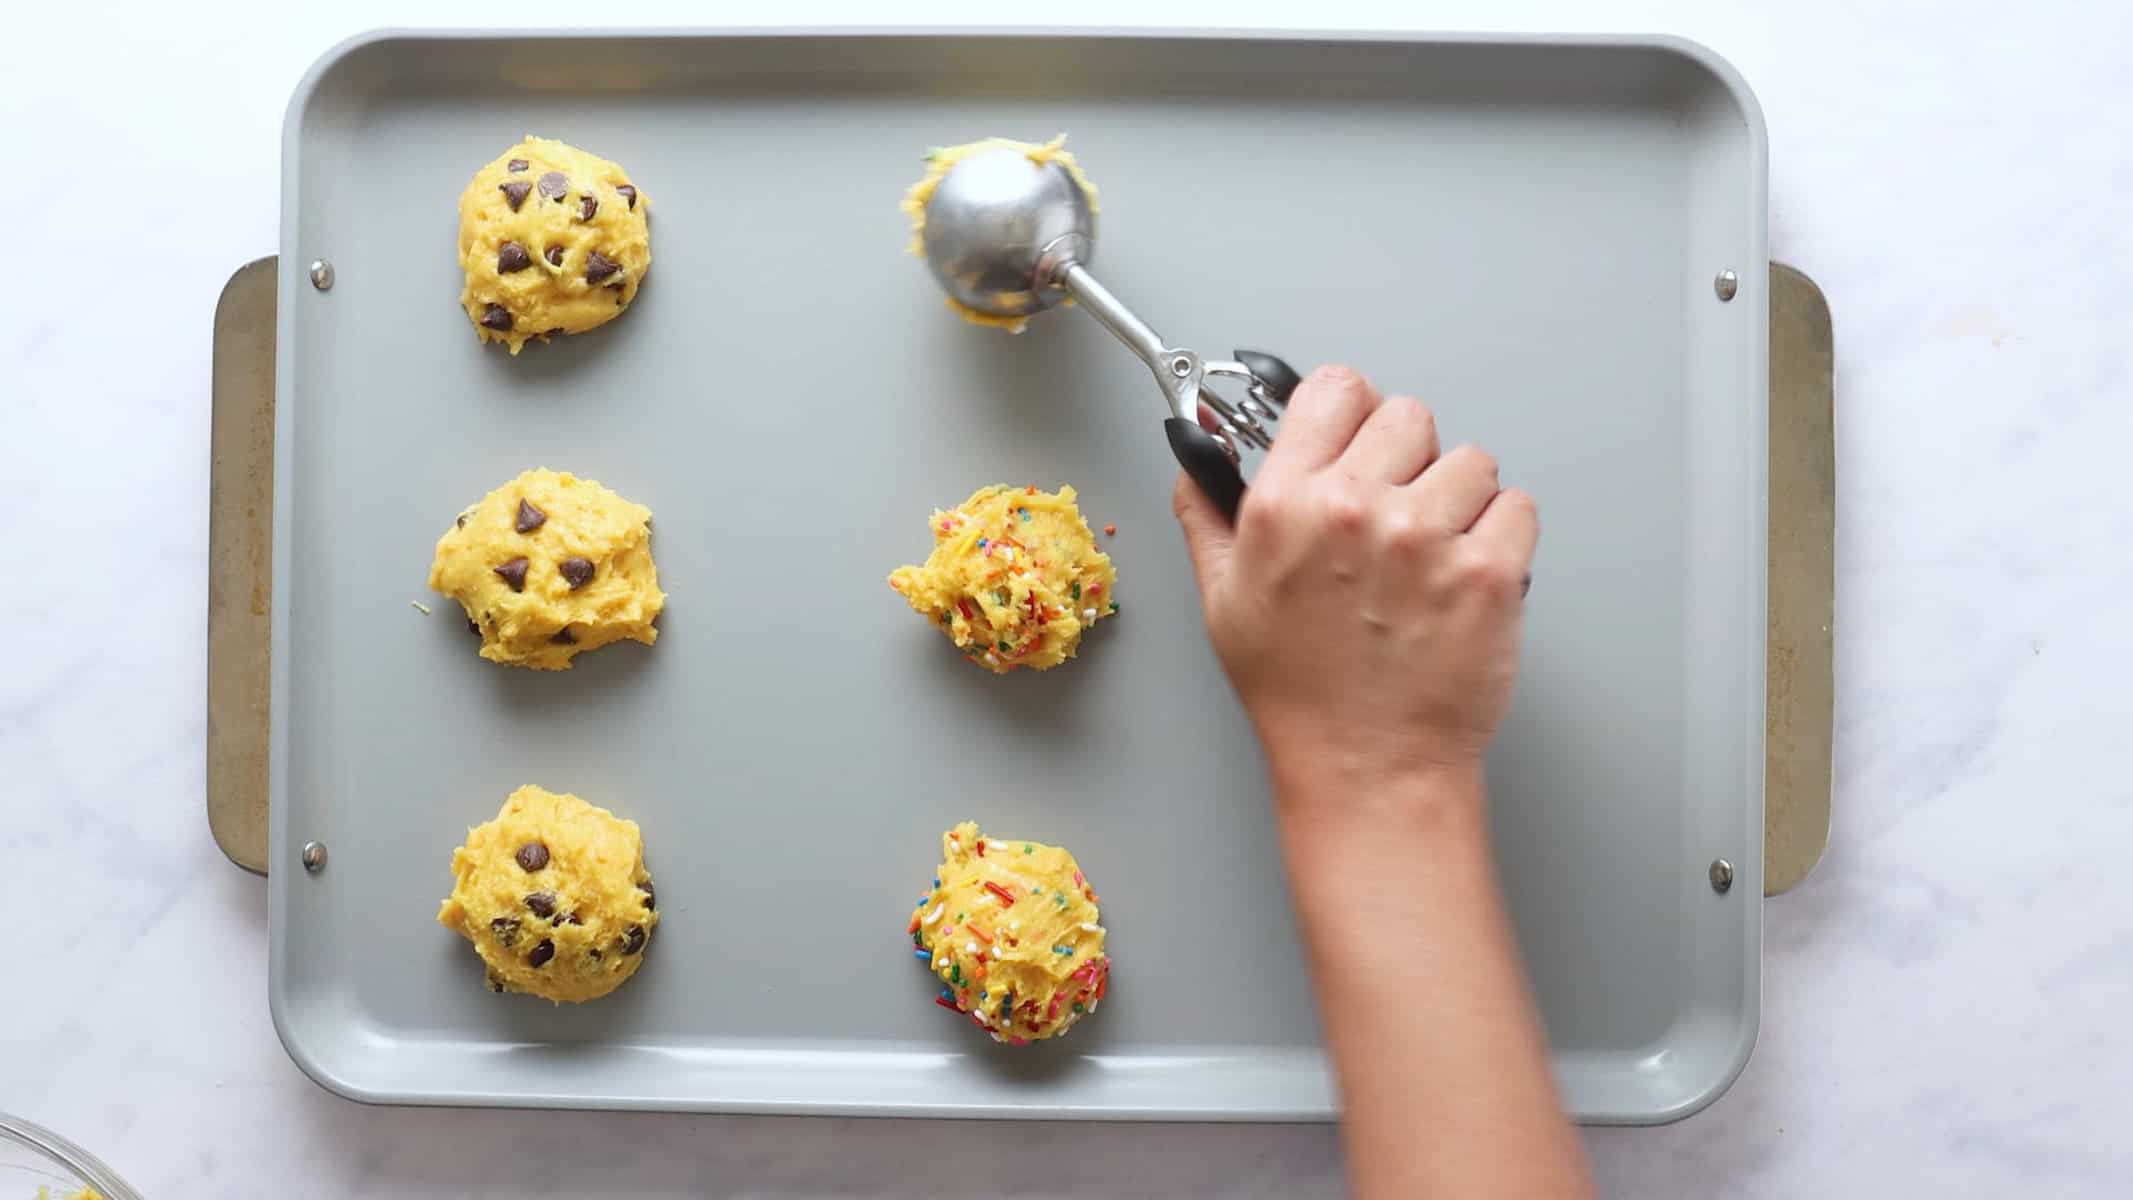 Hand using cookie scoop to place cookie dough balls on the baking sheet.